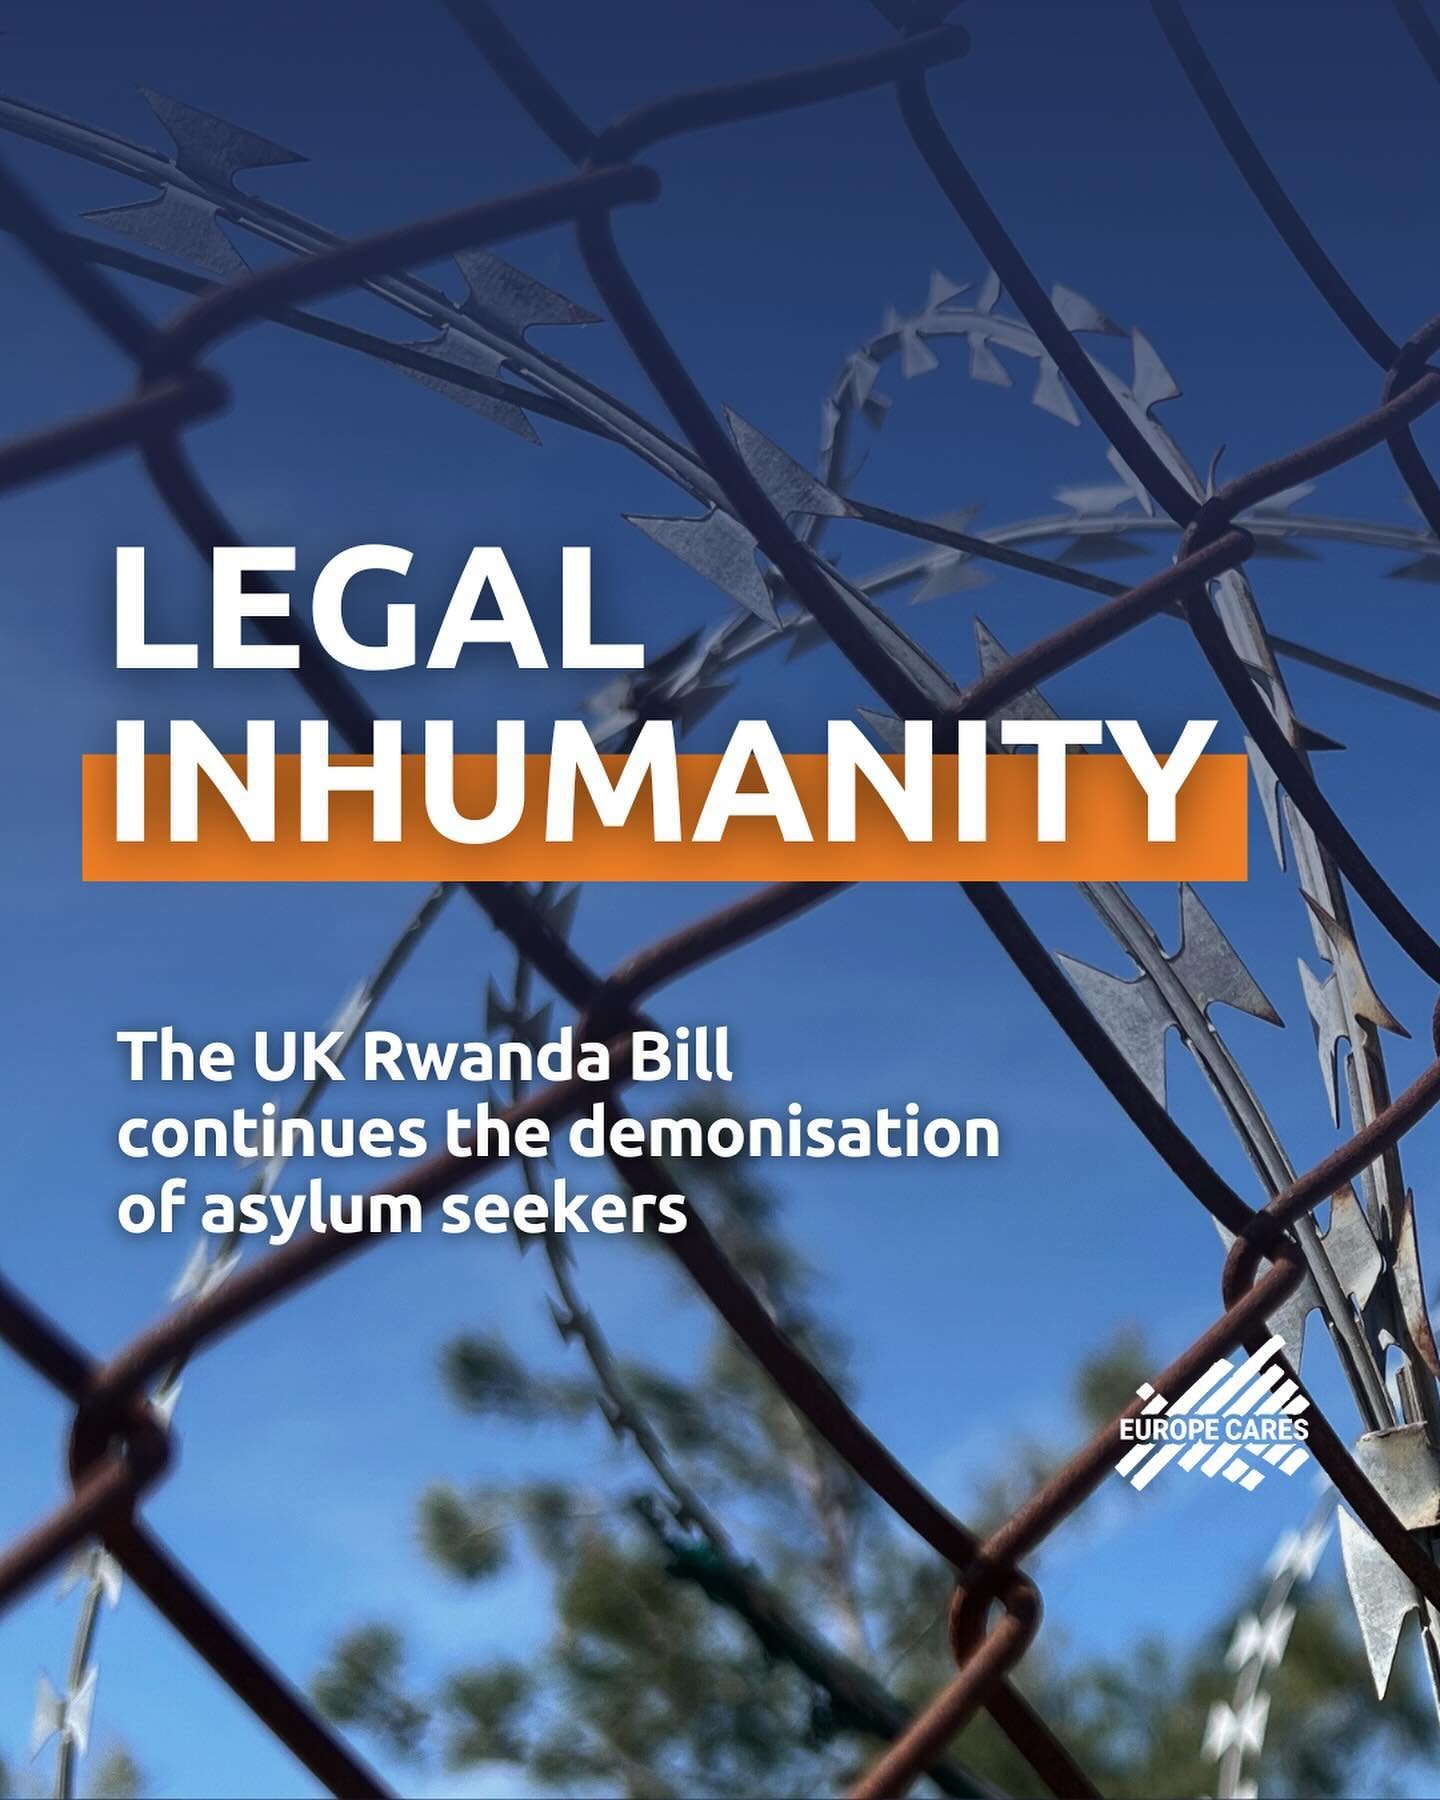 🚨 Last week, we witnessed the UK Government further its hostility towards asylum seekers through the passing of the &ldquo;Safety in Rwanda&rdquo; Bill. It is just one aspect of a longer trend of inhumanity towards people on the move, but its conseq